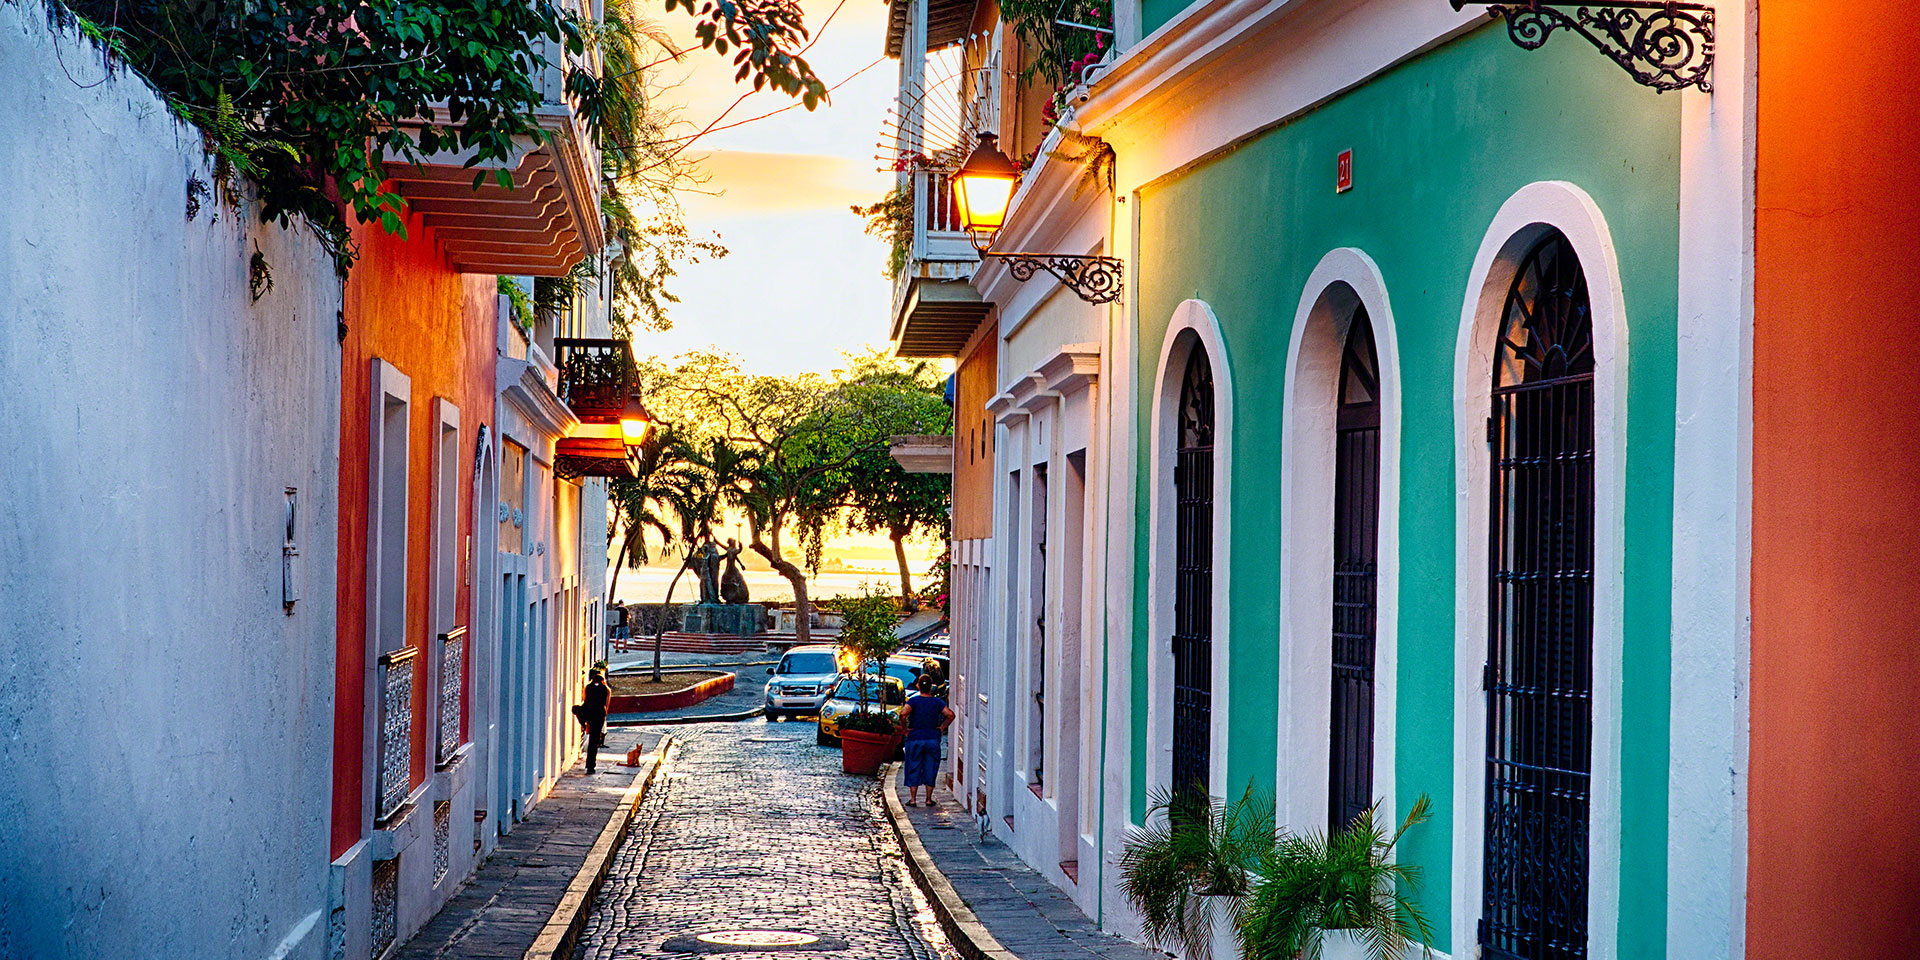 5 Things to Do in Old San Juan Beyond the Castillo